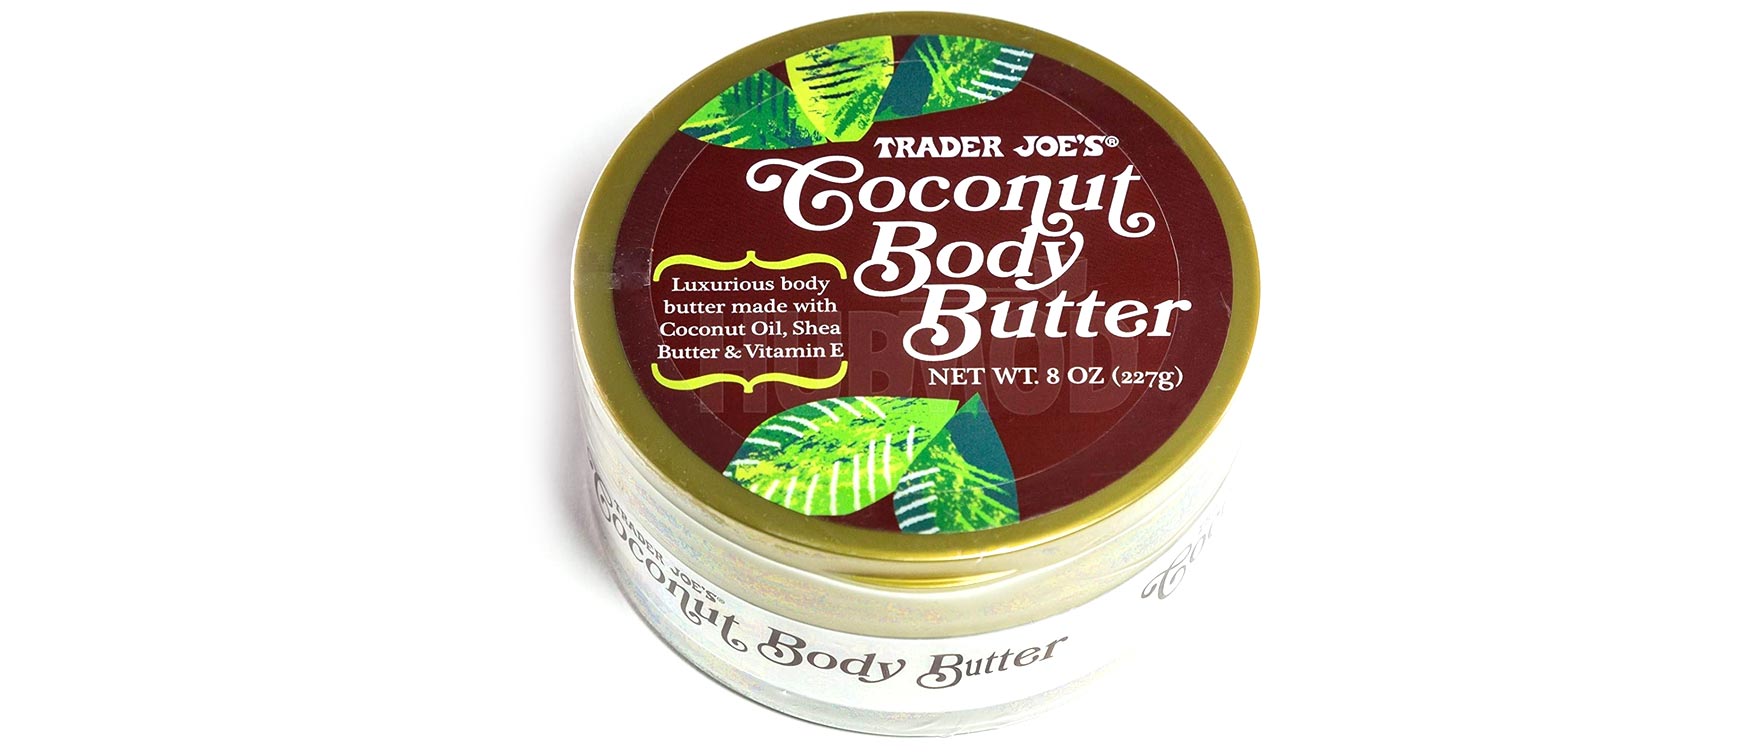 8. Closest to the Real Bum Bum Cream: Trader Joe’s Coconut Body Butter